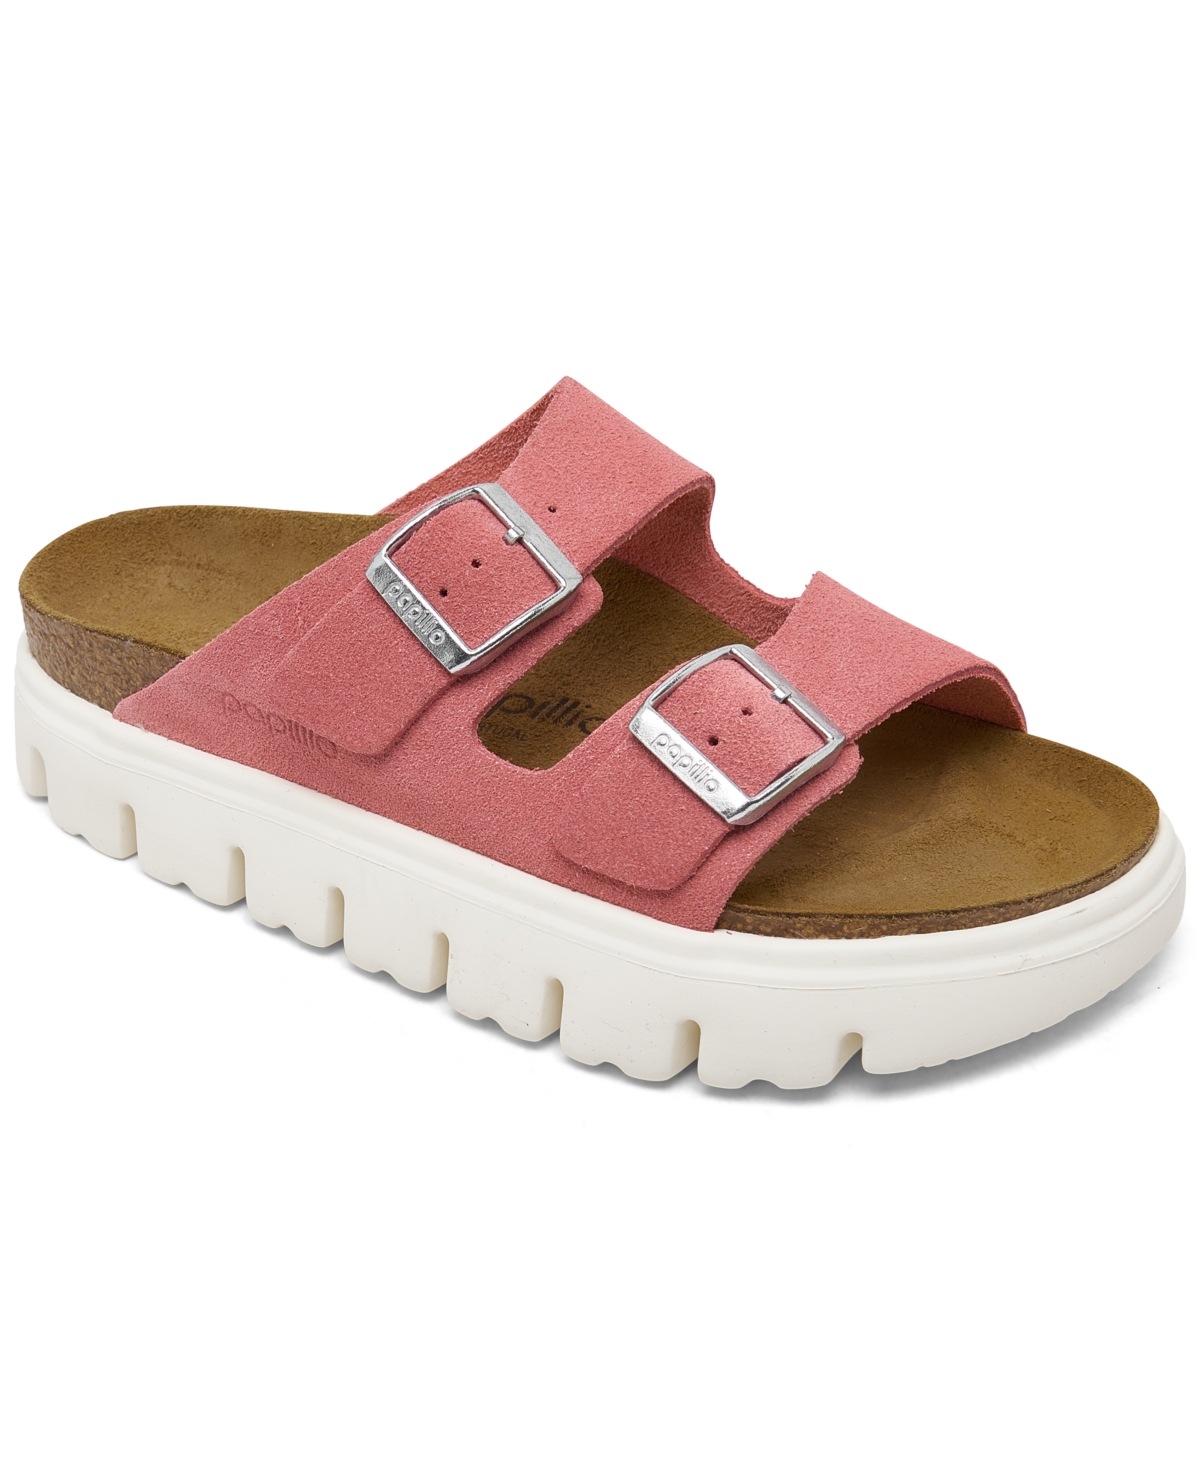 Shop Birkenstock Papillio By  Women's Arizona Chunky Suede Leather Platform Sandals From Finish Line In Candy Pink